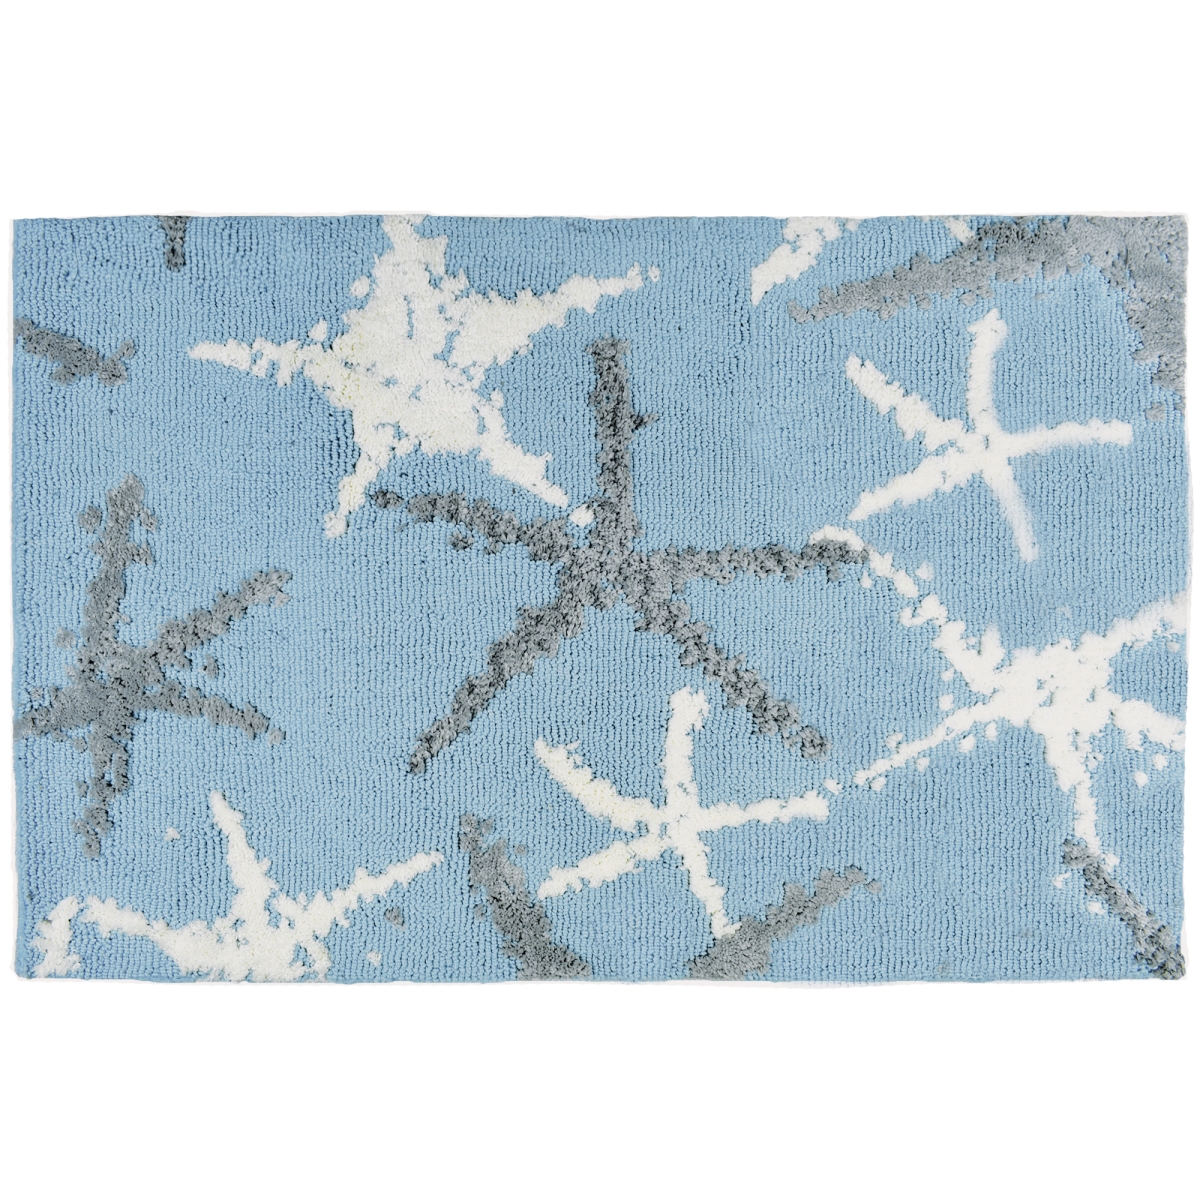 Pmf-kr001b 34 X 22 X 0.5 In. Tranquil Seas Indoor Area Rug, Multi Color